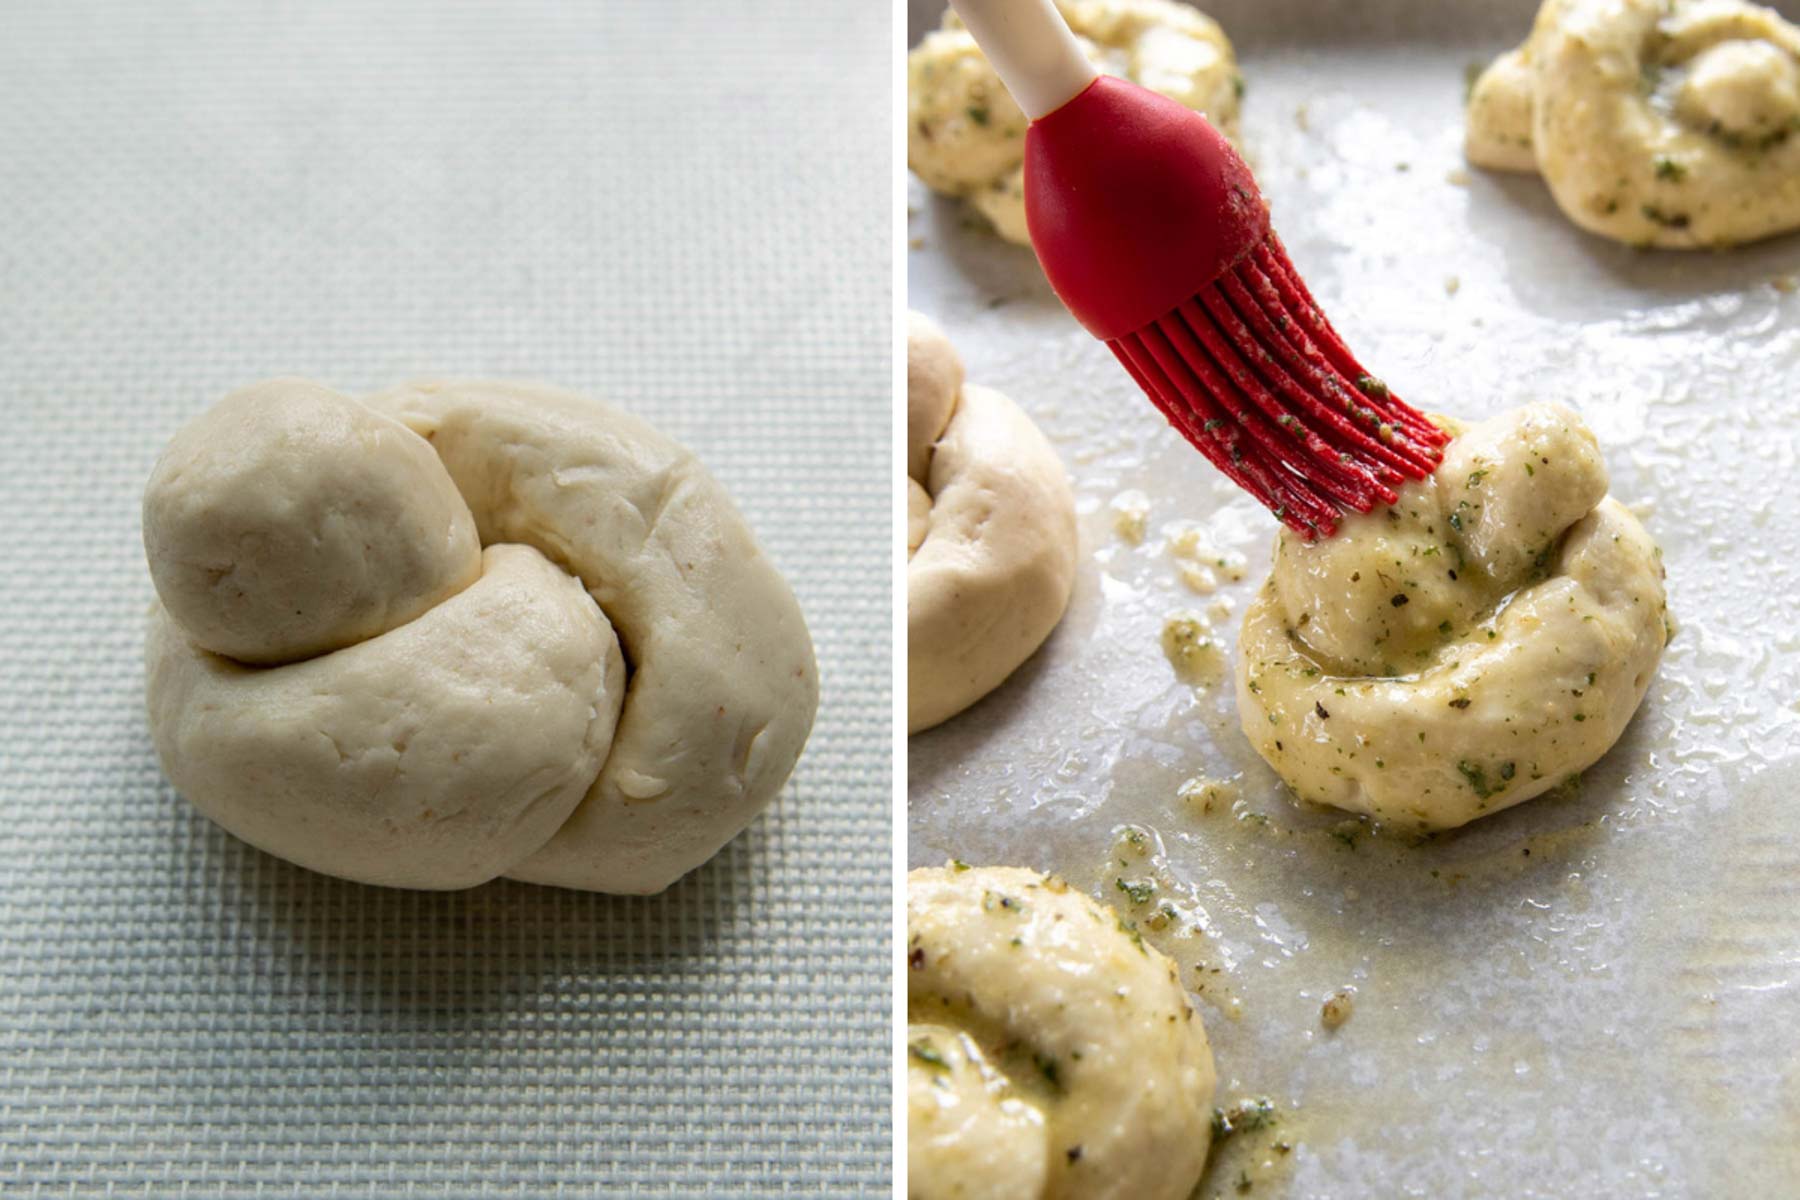 images showing how to shape gluten free garlic knots dough and brush it with butter.